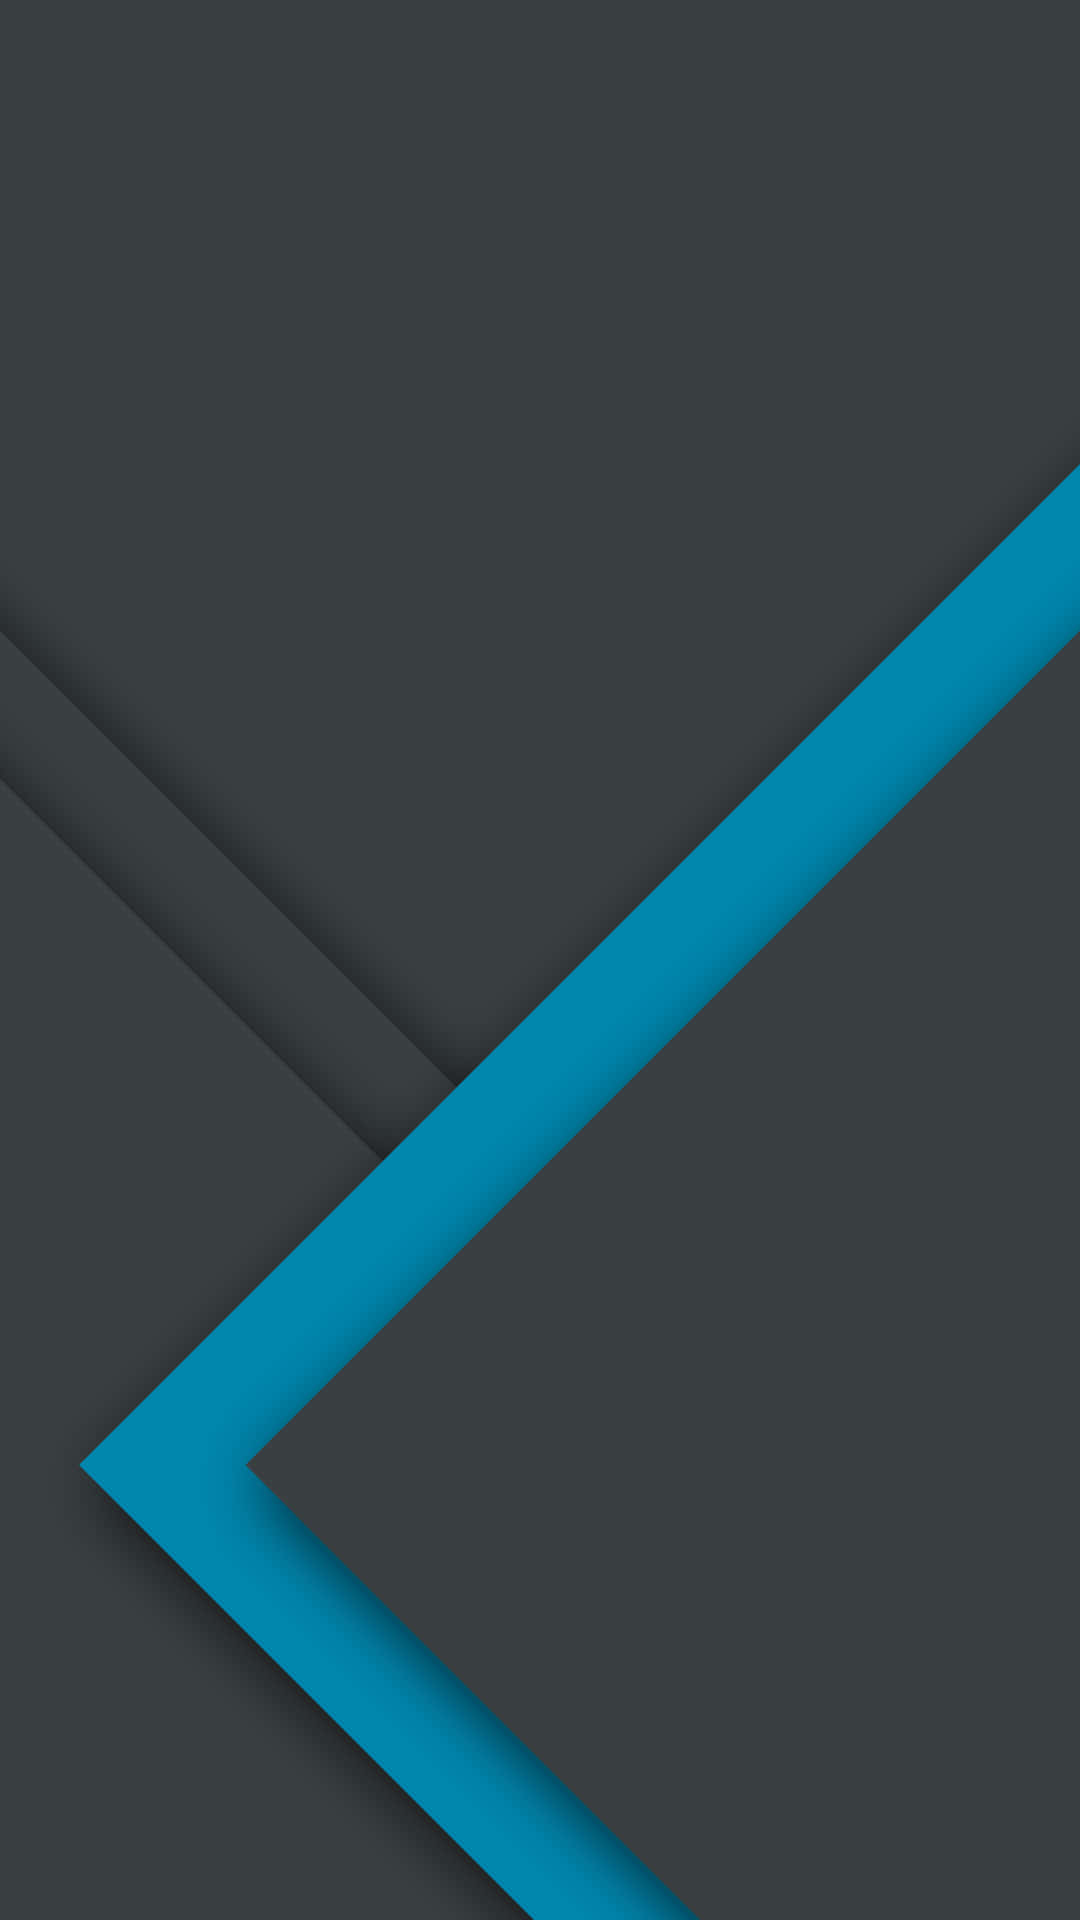 A Blue And Black Background With A Blue Arrow